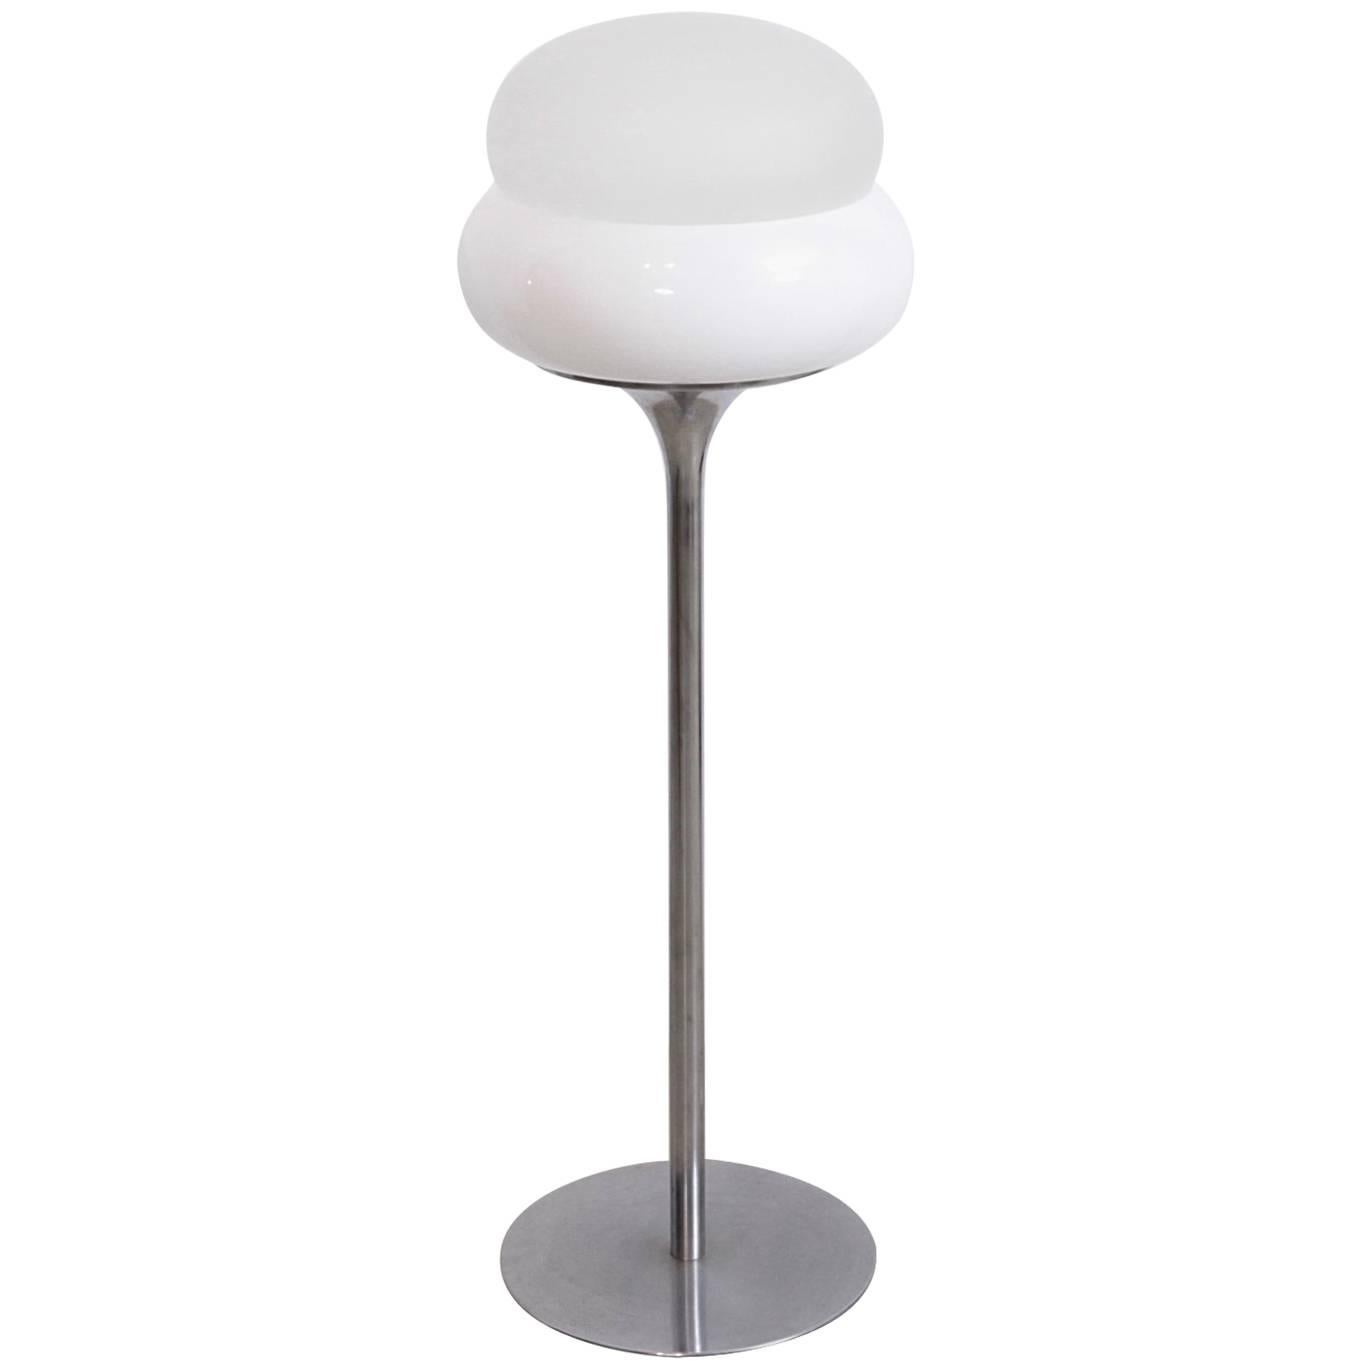 Italian 1970s Floor Lamp with Glass/ Lucite Shade in the Manner of Tobia Scarpa